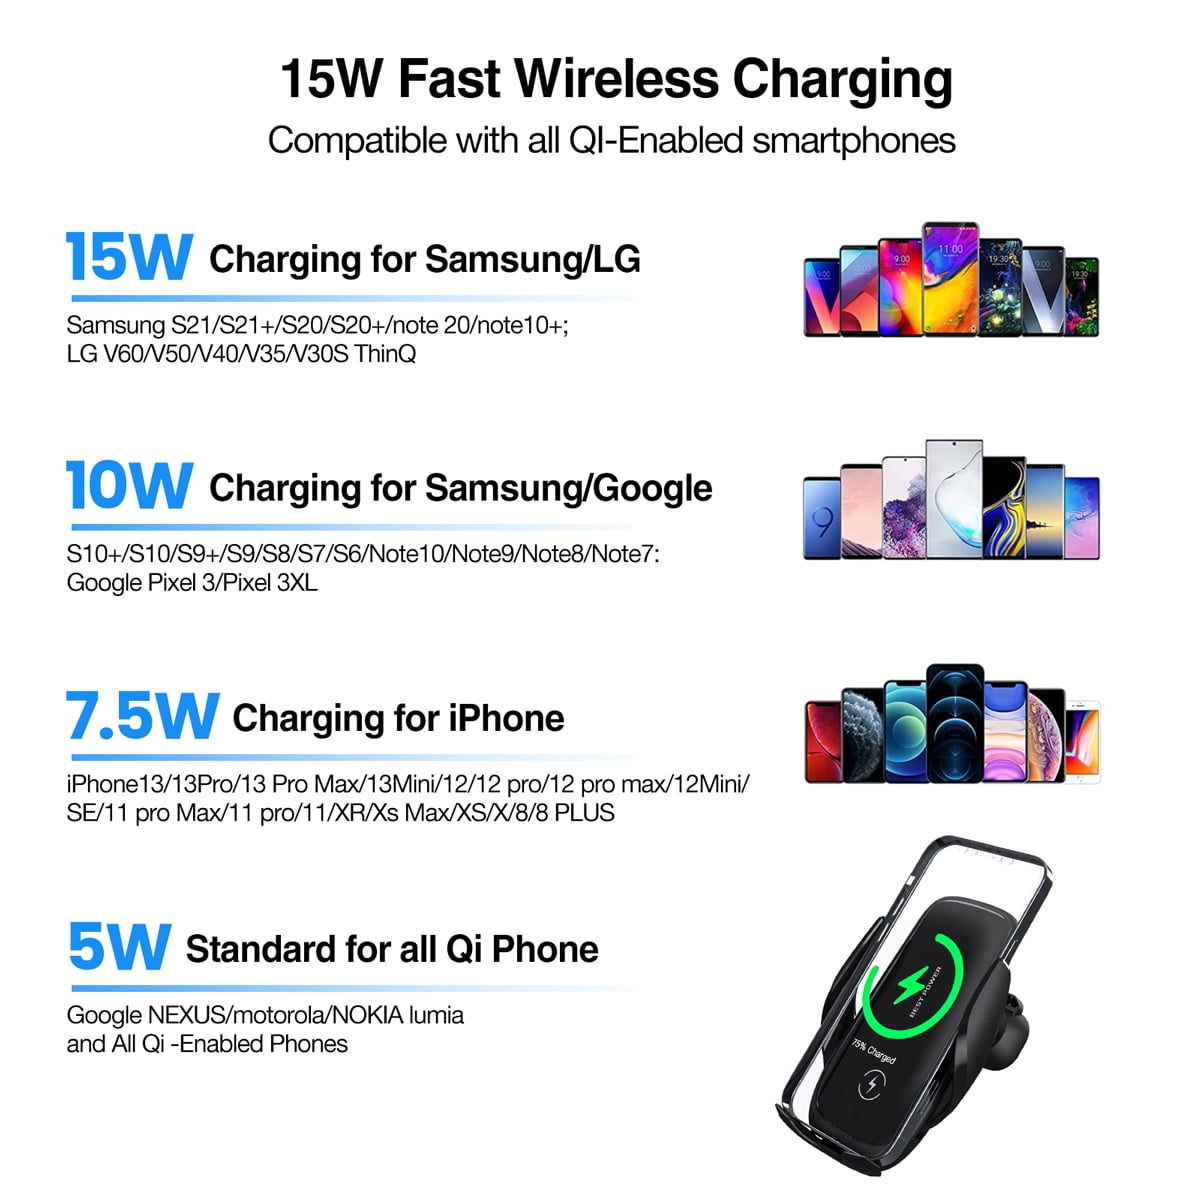 Wireless Car Charger Mount 15W Qi Fast Charging Auto-Clamping Air Vent Car Phone Mount and More Galaxy S20/S20 Car Phone Holder Compatible with iPhone 12 Pro Max/12 pro/12/11/XS/8 